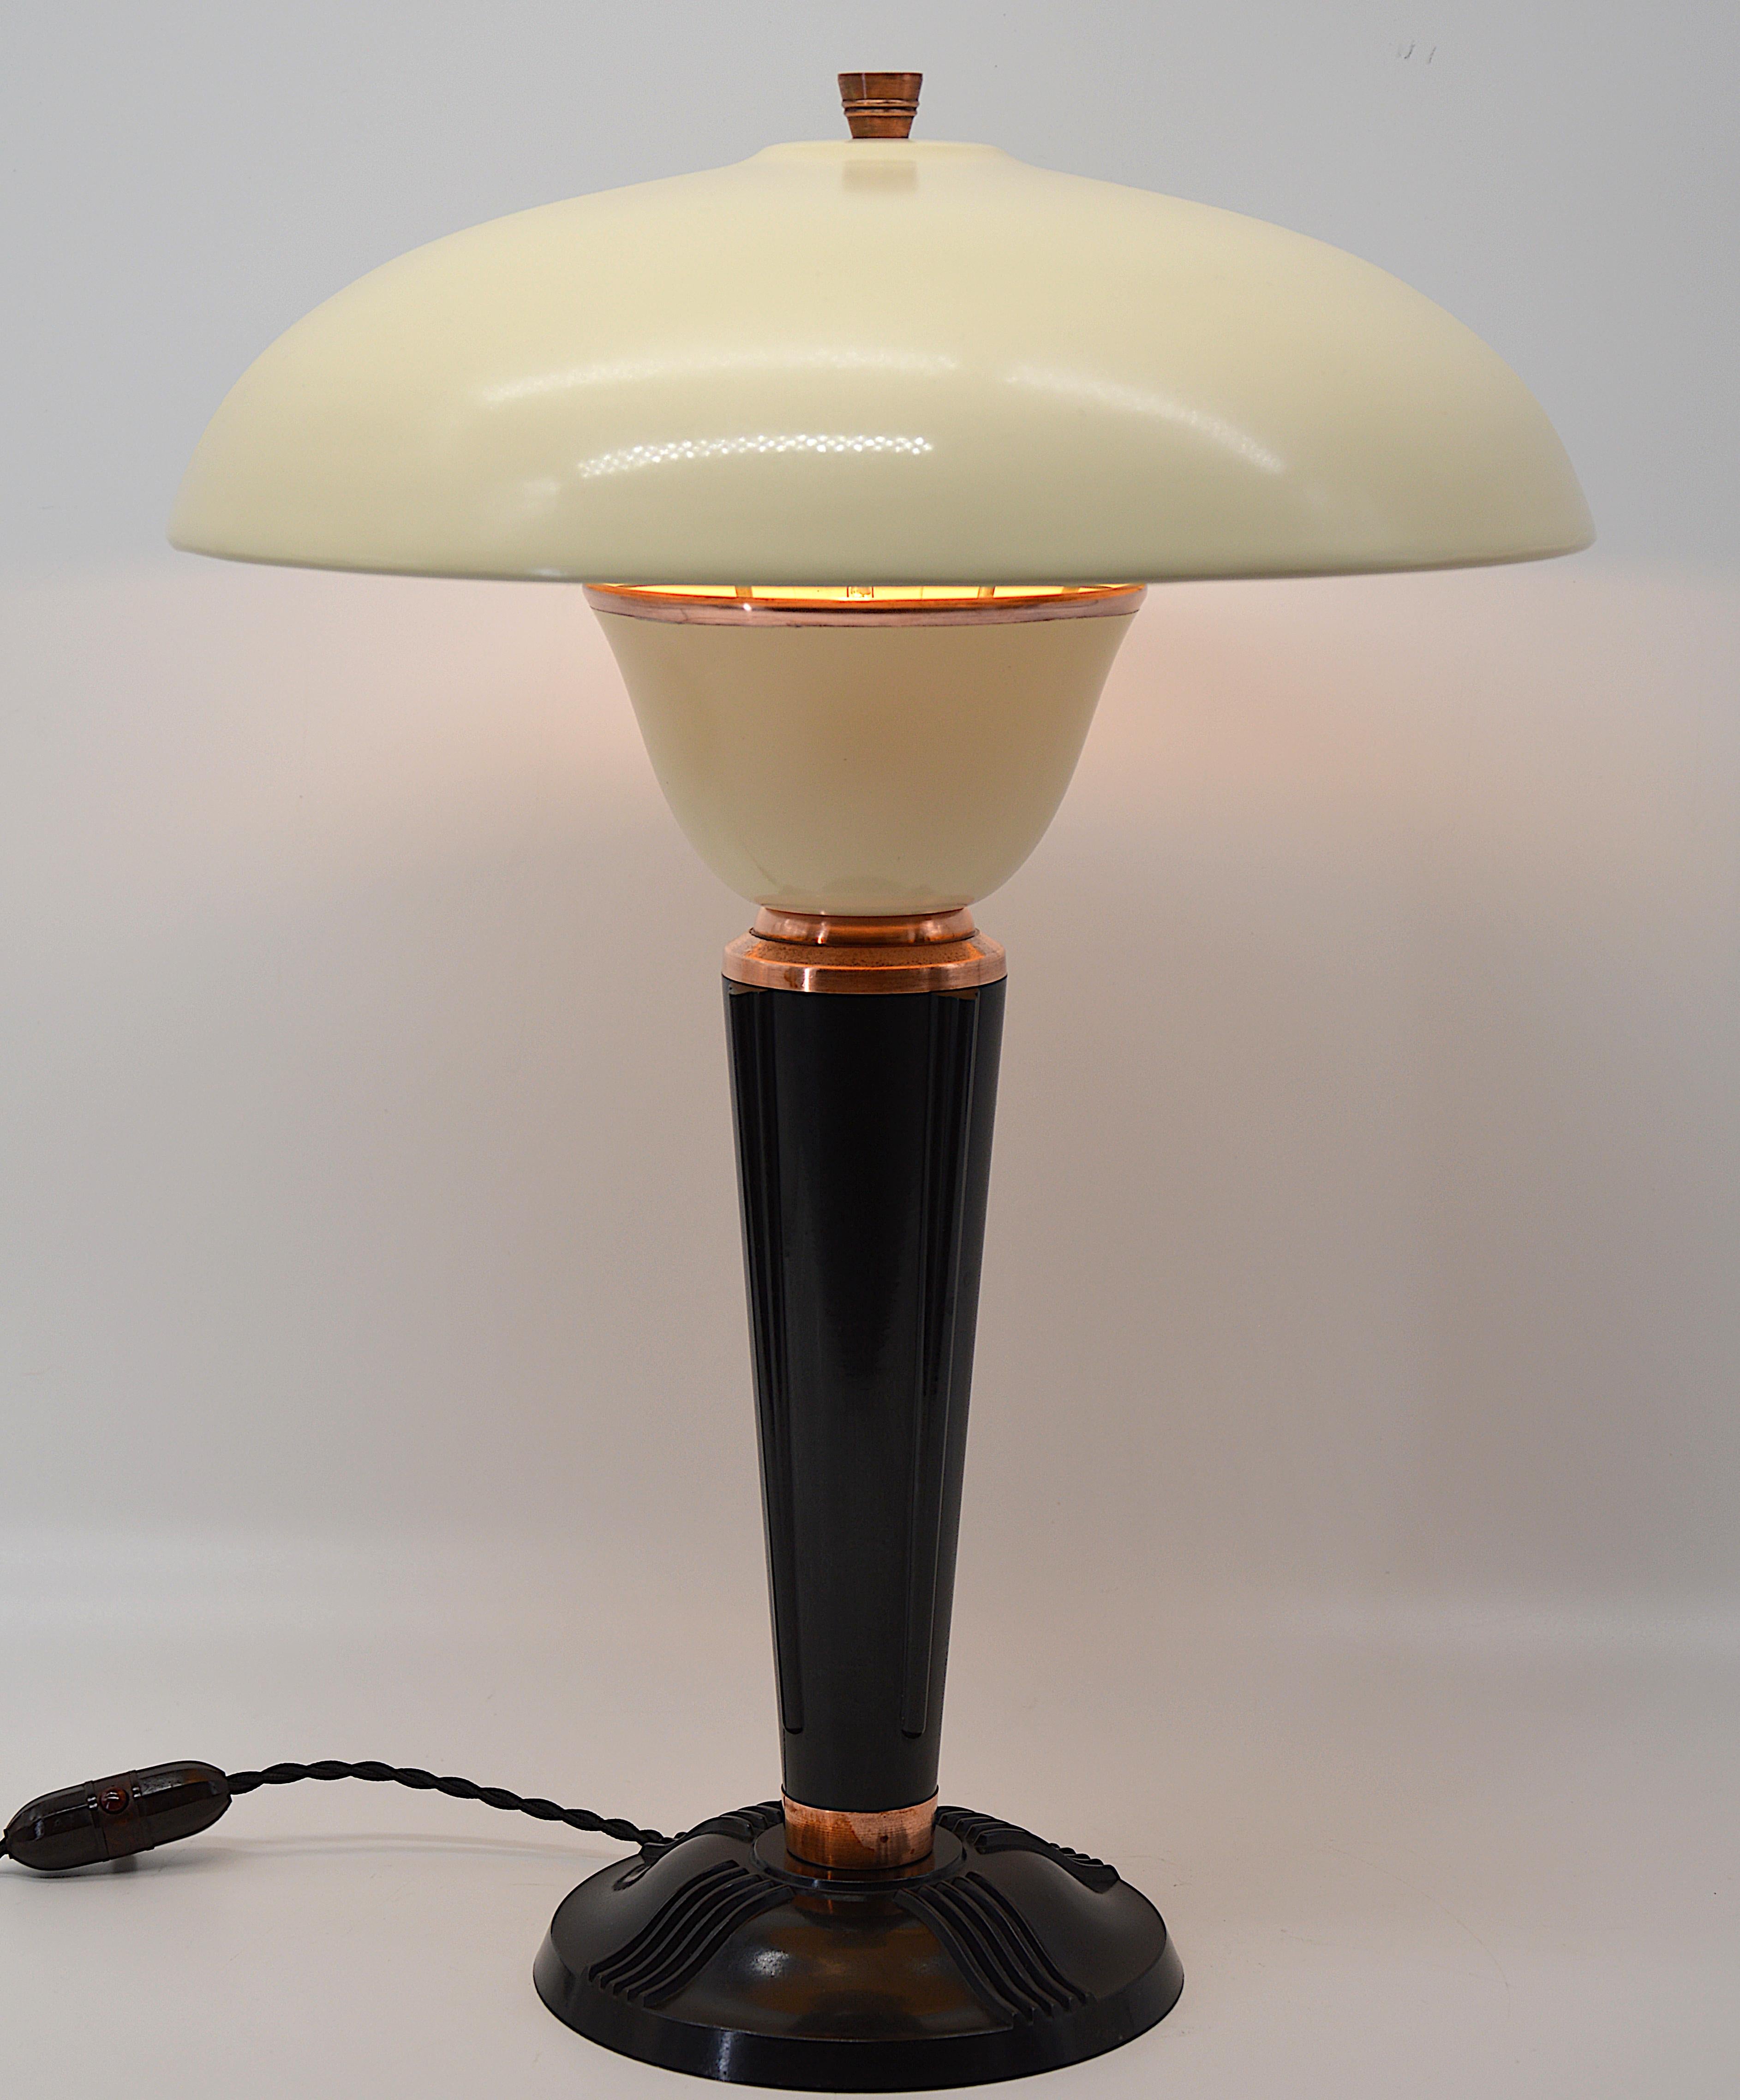 Eileen Gray for Jumo French Art Deco Desk/Table Lamp Late 1930s 1